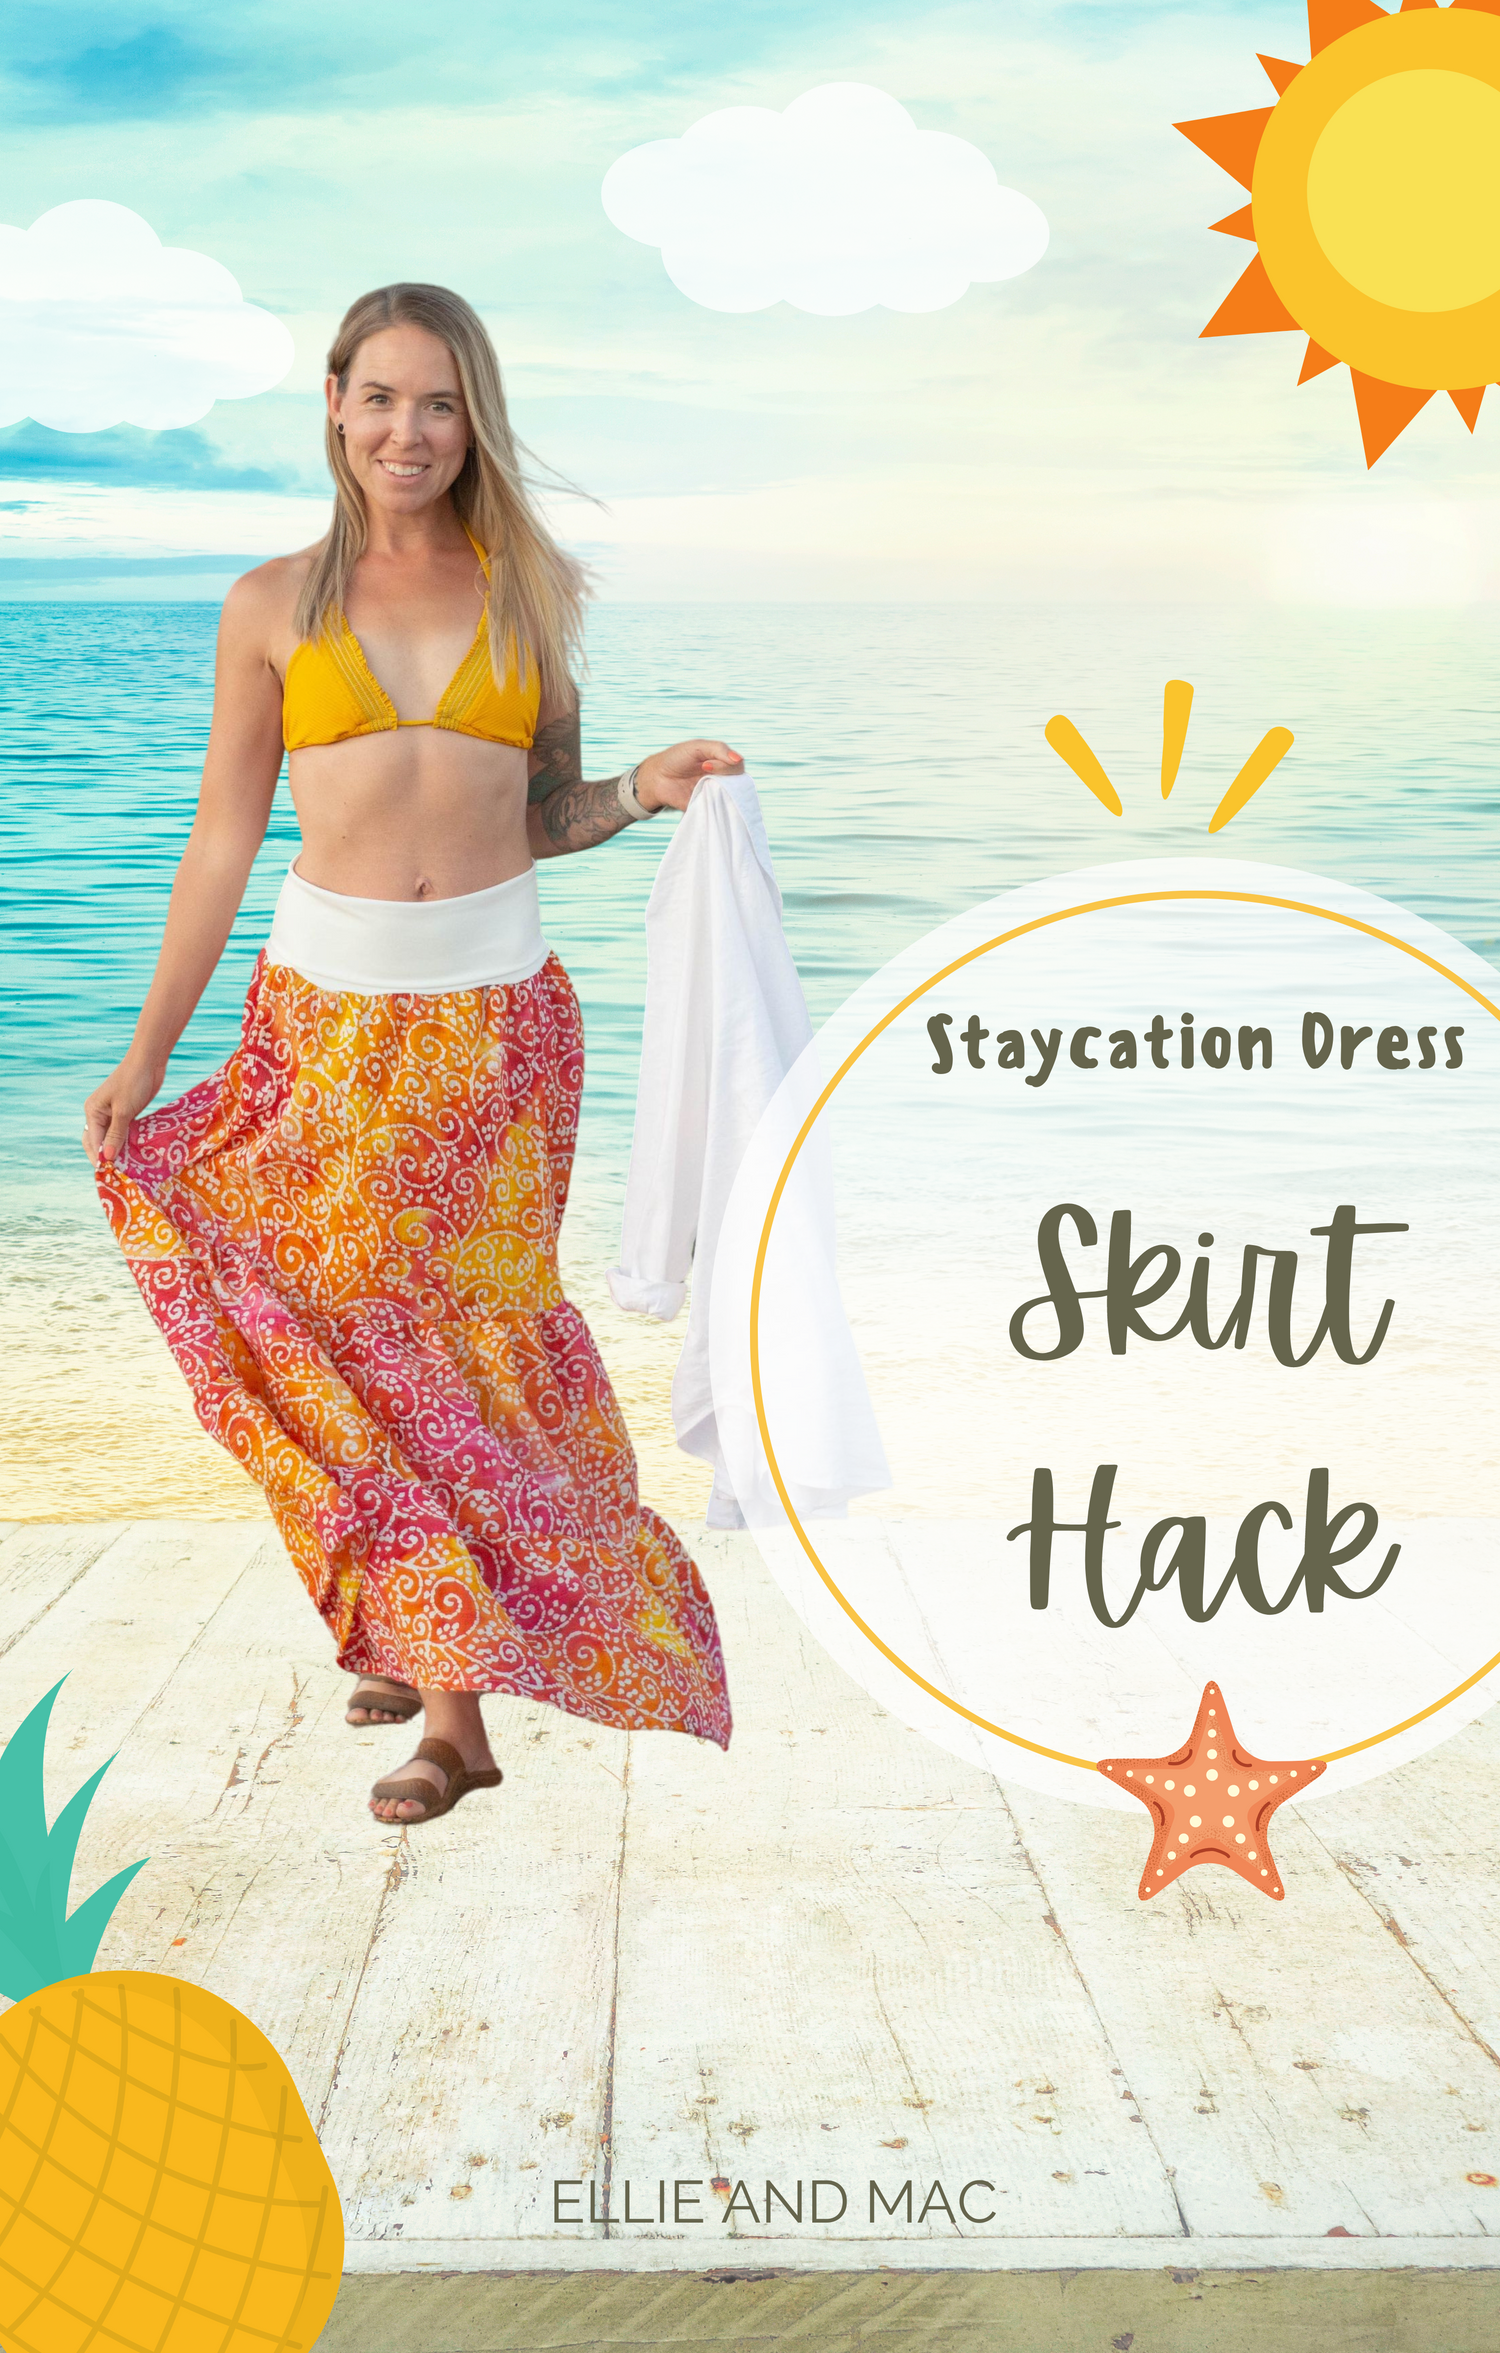 Staycation Skirt Hack Two-Ways!